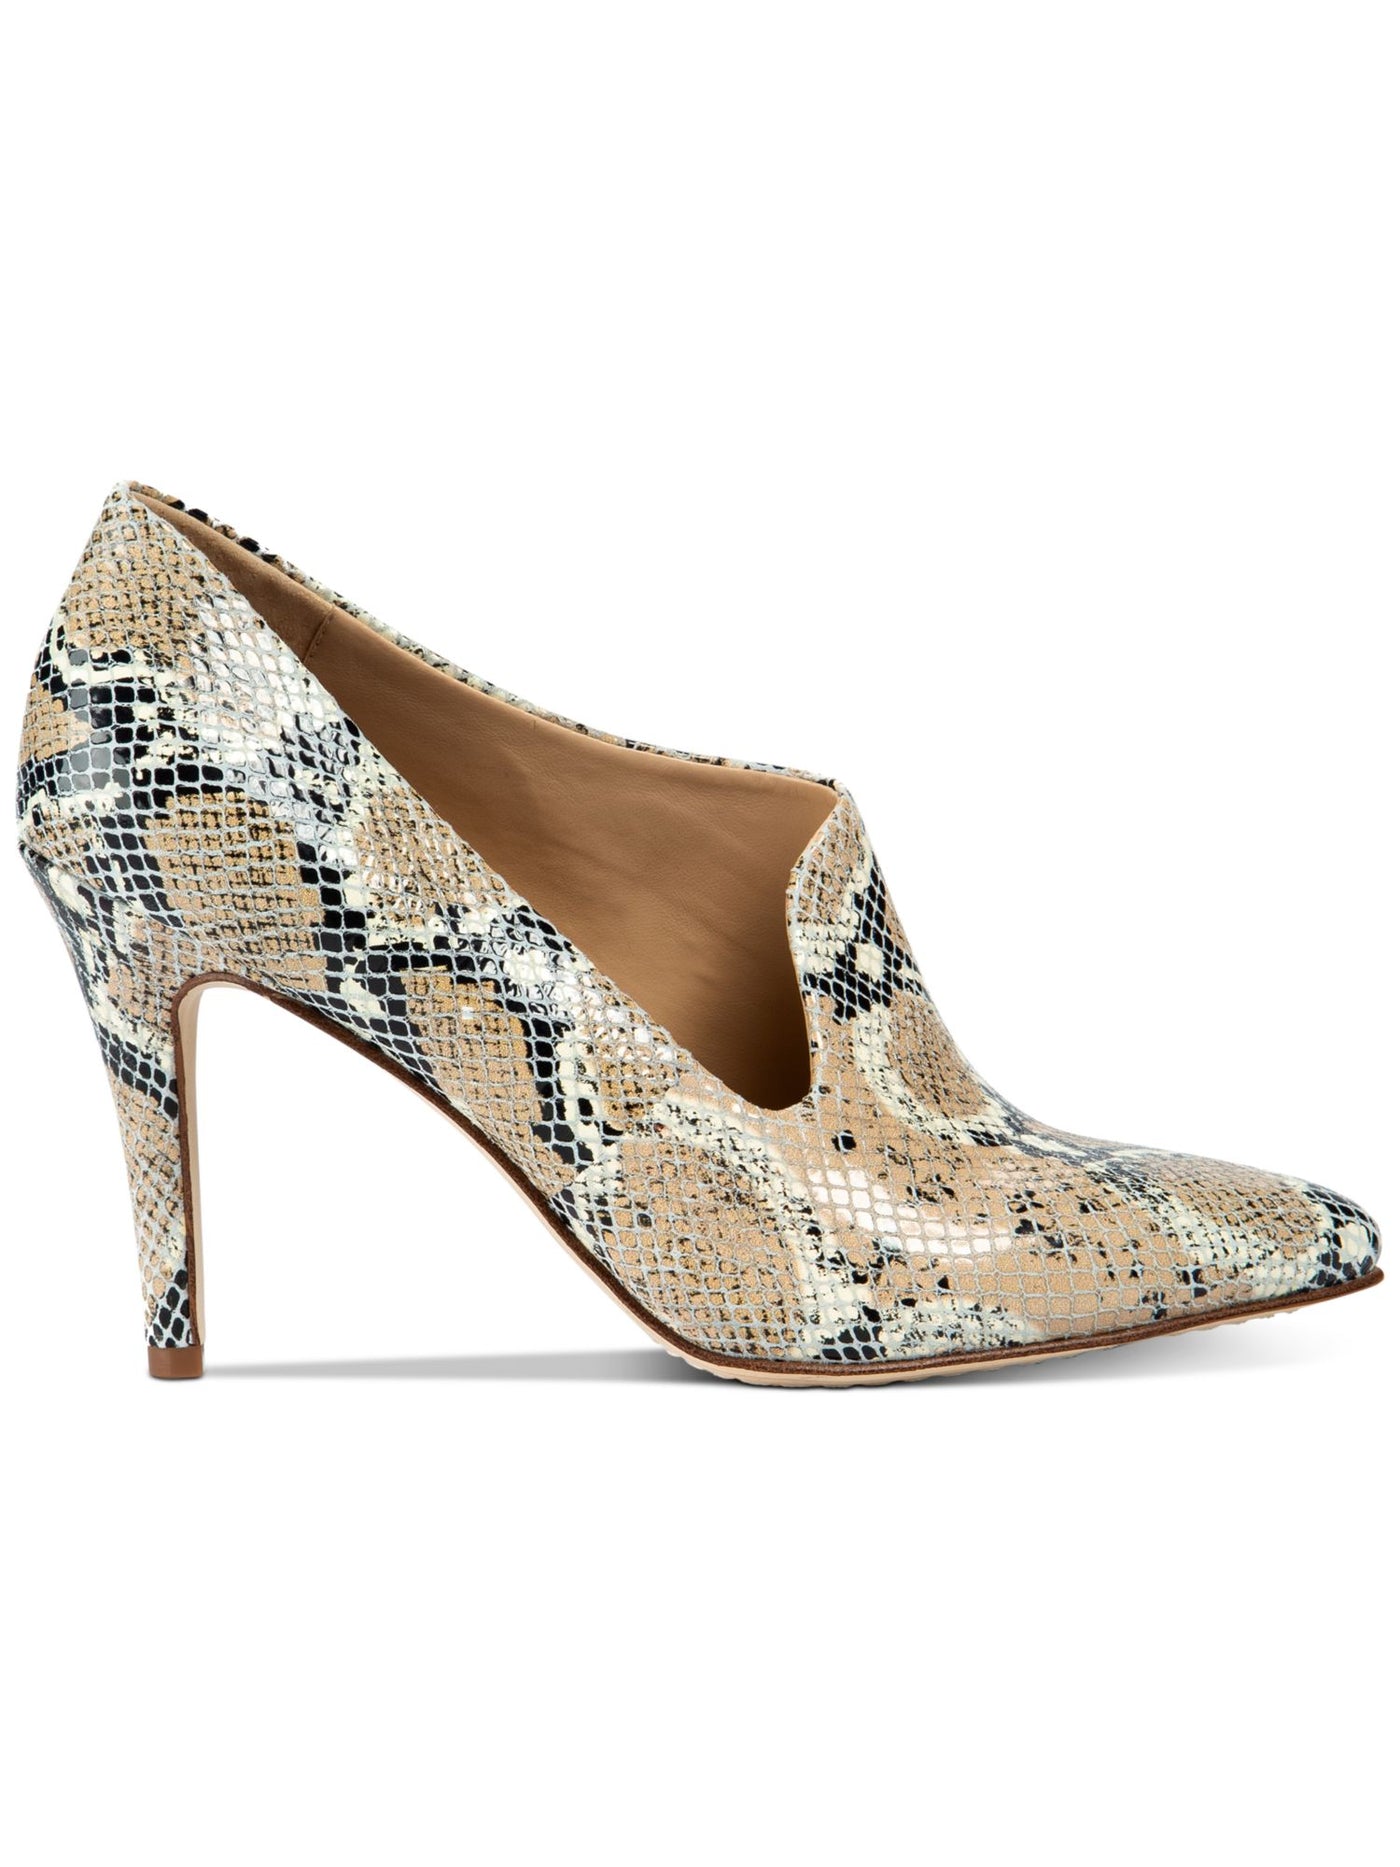 LUCCA LANE Womens Beige Snakeskin Cushioned Asymmetrical Yalexis Pointed Toe Stiletto Slip On Leather Pumps Shoes 8.5 M